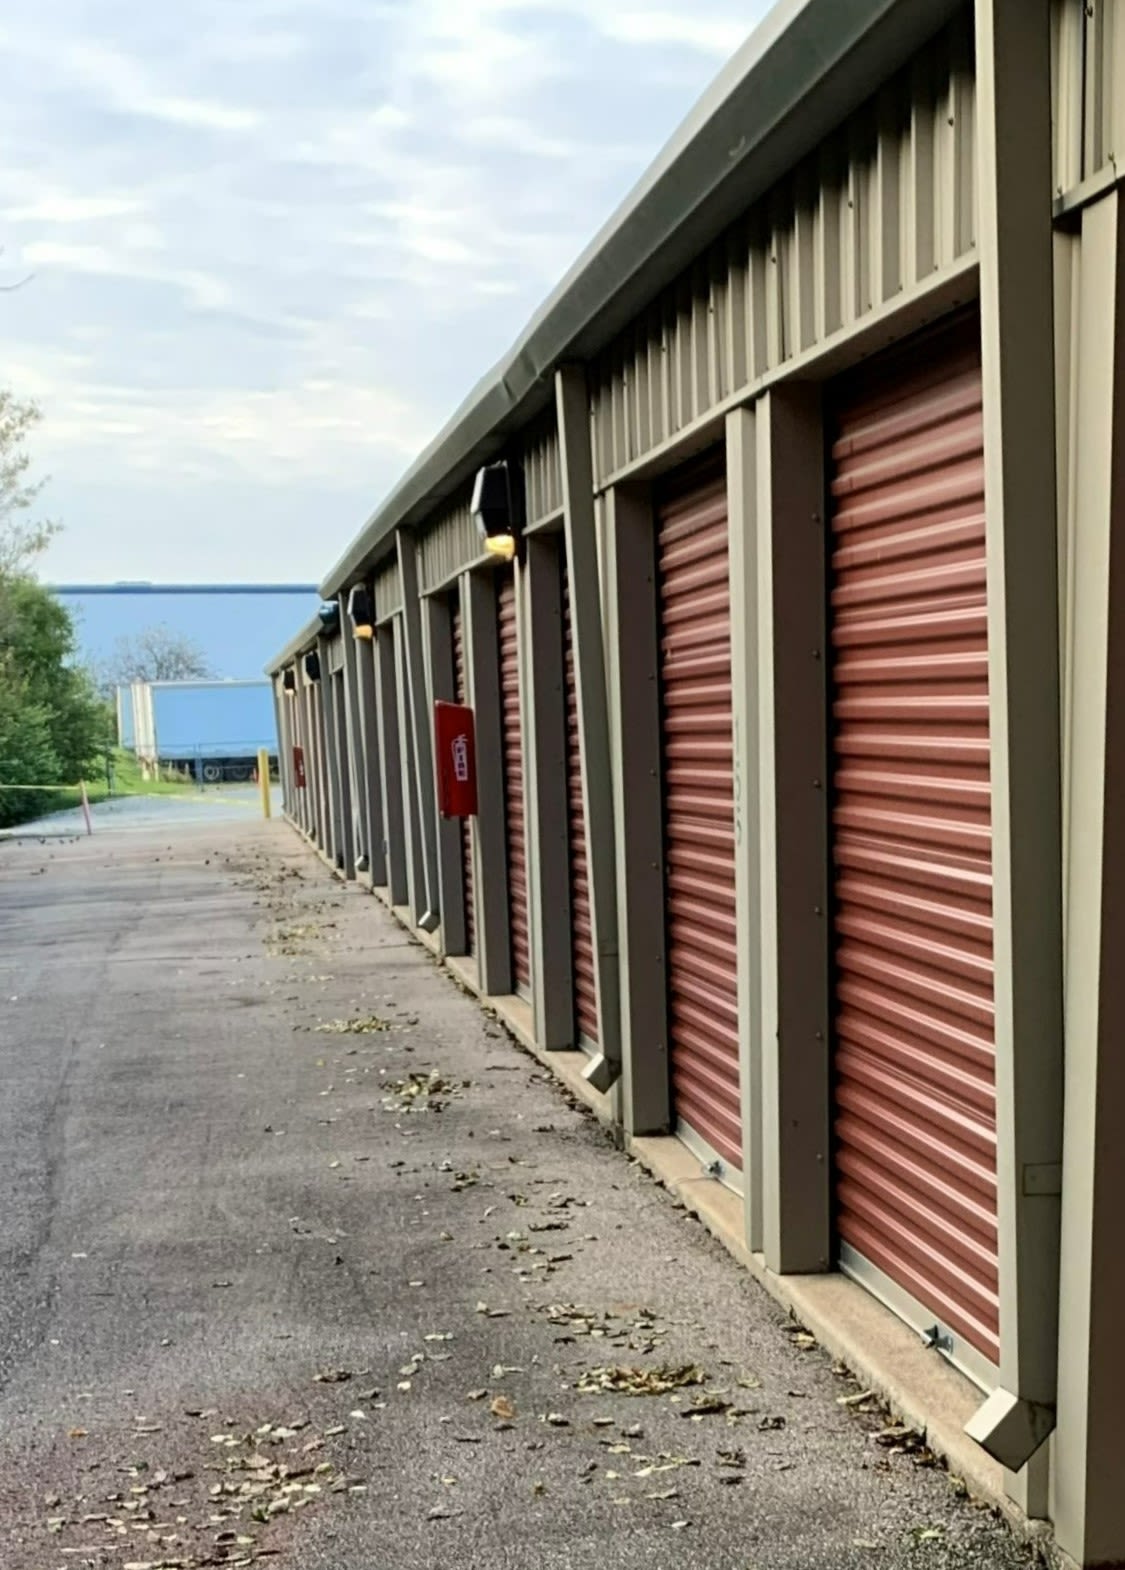 Learn more about features at KO Storage of Tipp City in Tipp City, Ohio